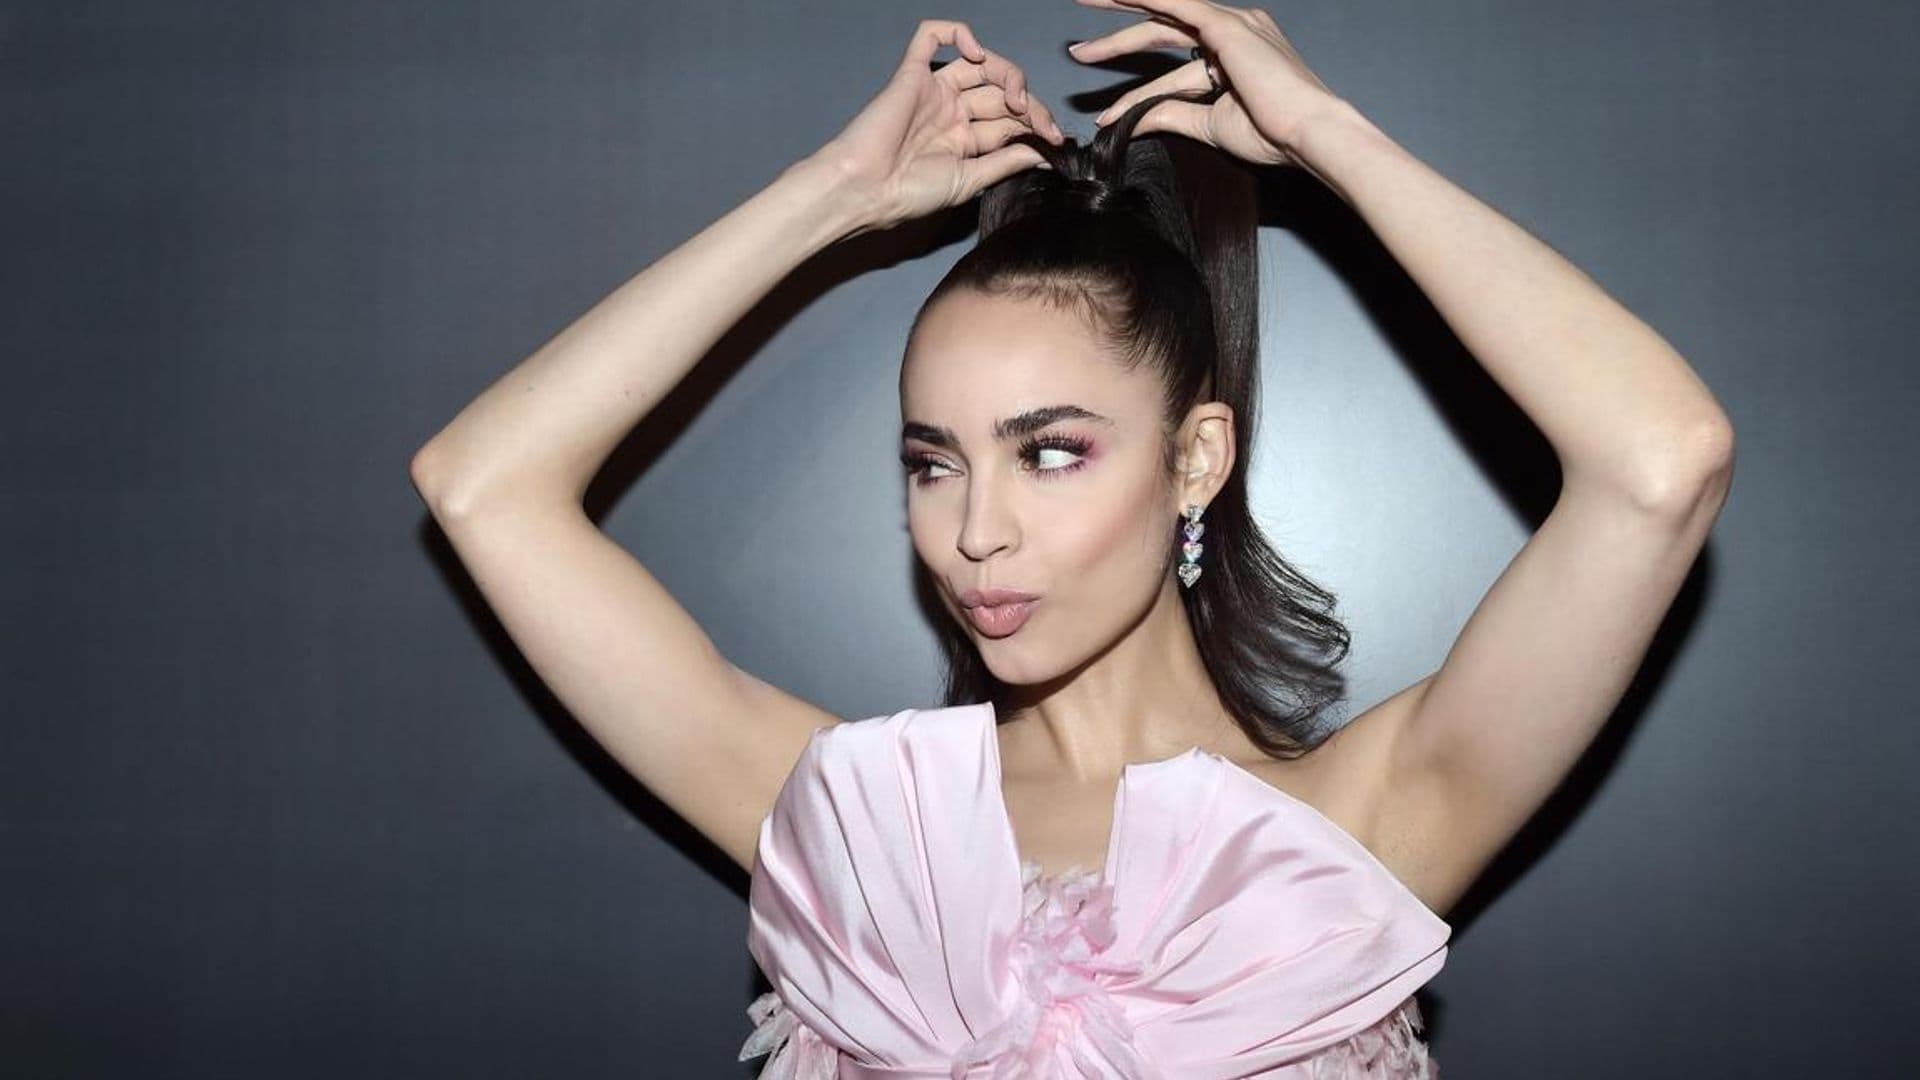 Sofia Carson’s most important work yet and what excites her for the future